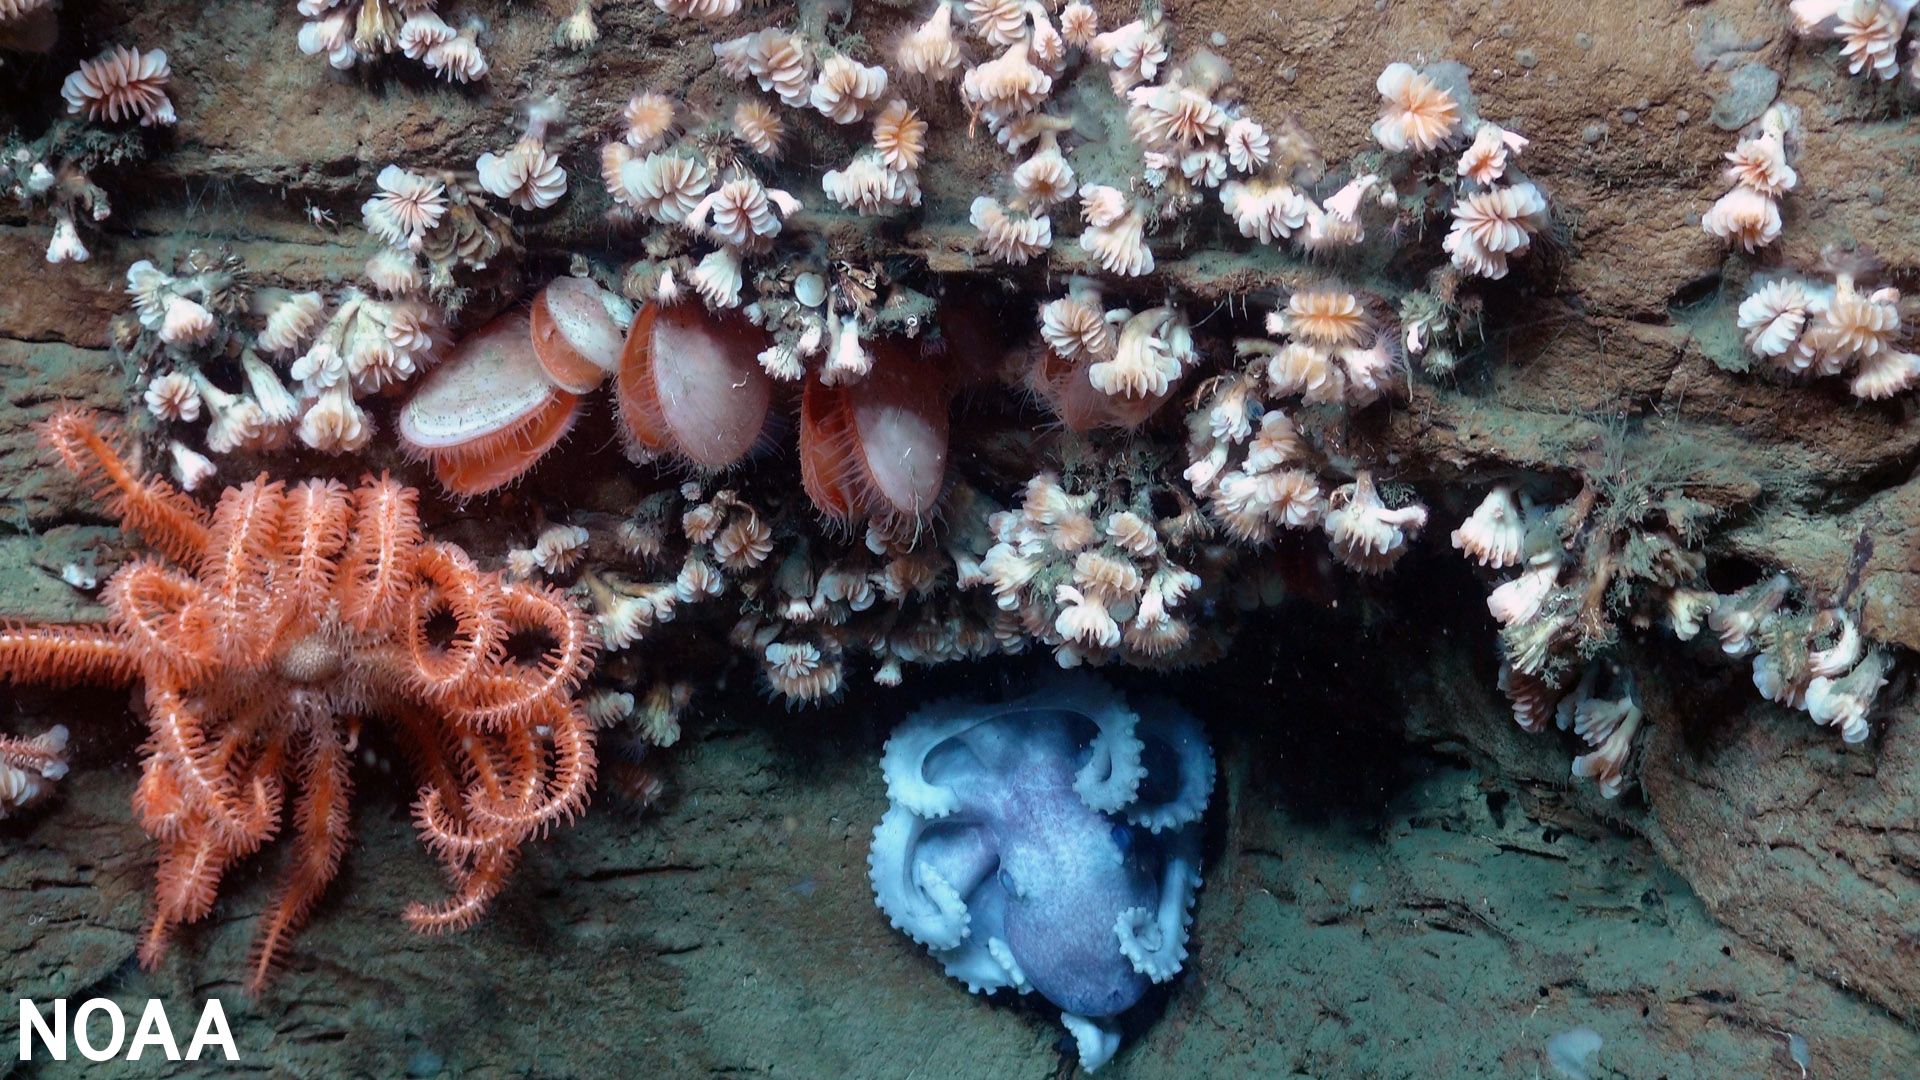 An octopus, sea star, bivalves and dozens of cup coral 